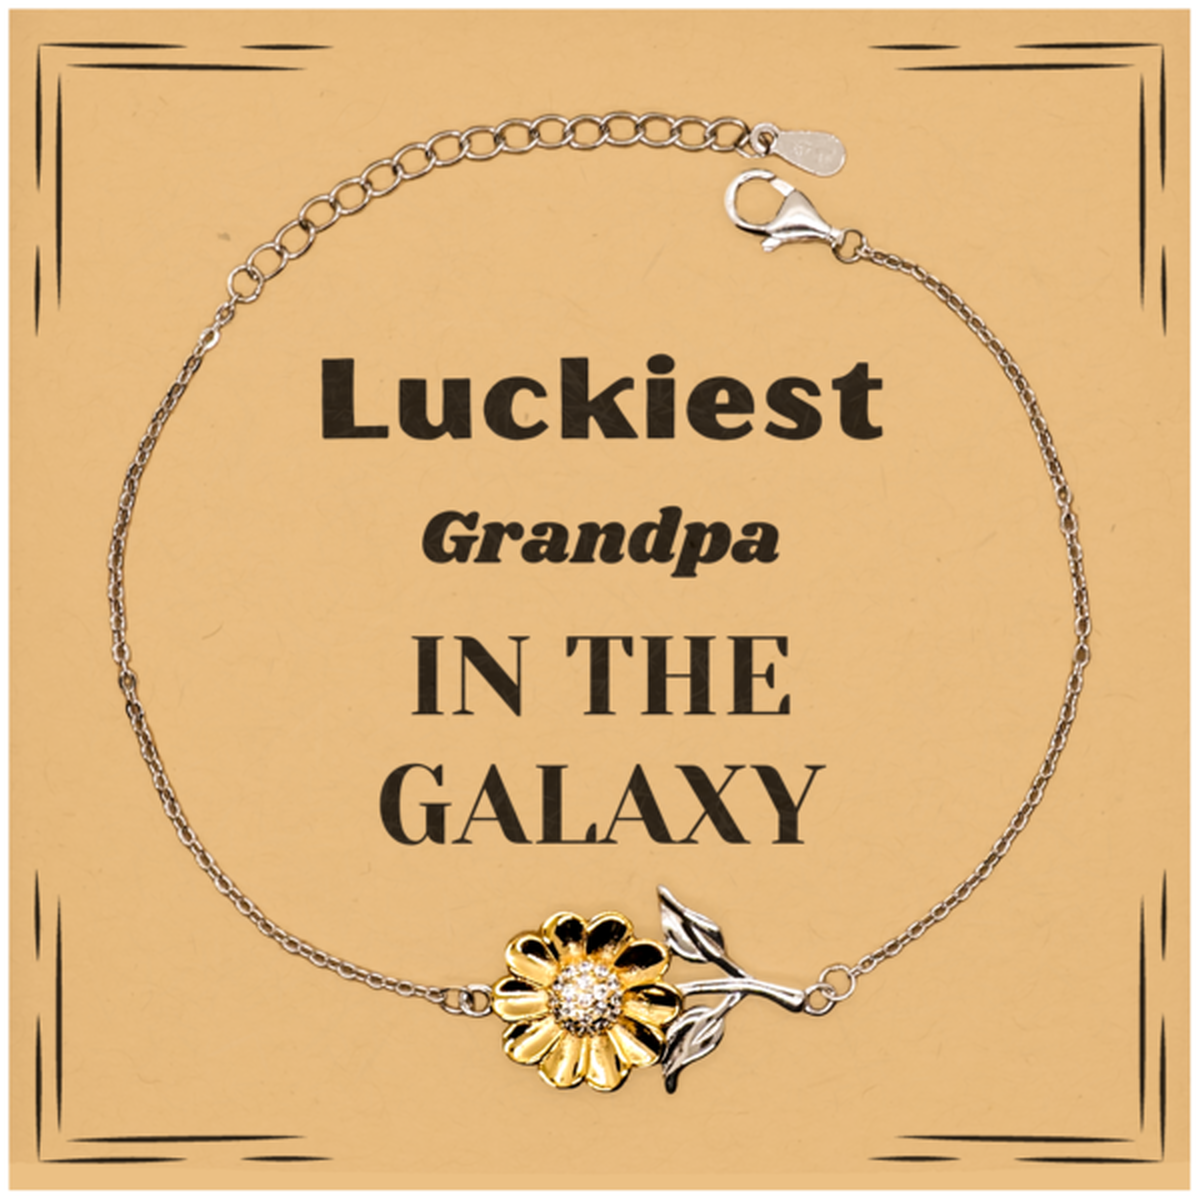 Luckiest Grandpa in the Galaxy, To My Grandpa Message Card Gifts, Christmas Grandpa Sunflower Bracelet Gifts, X-mas Birthday Unique Gifts For Grandpa Men Women